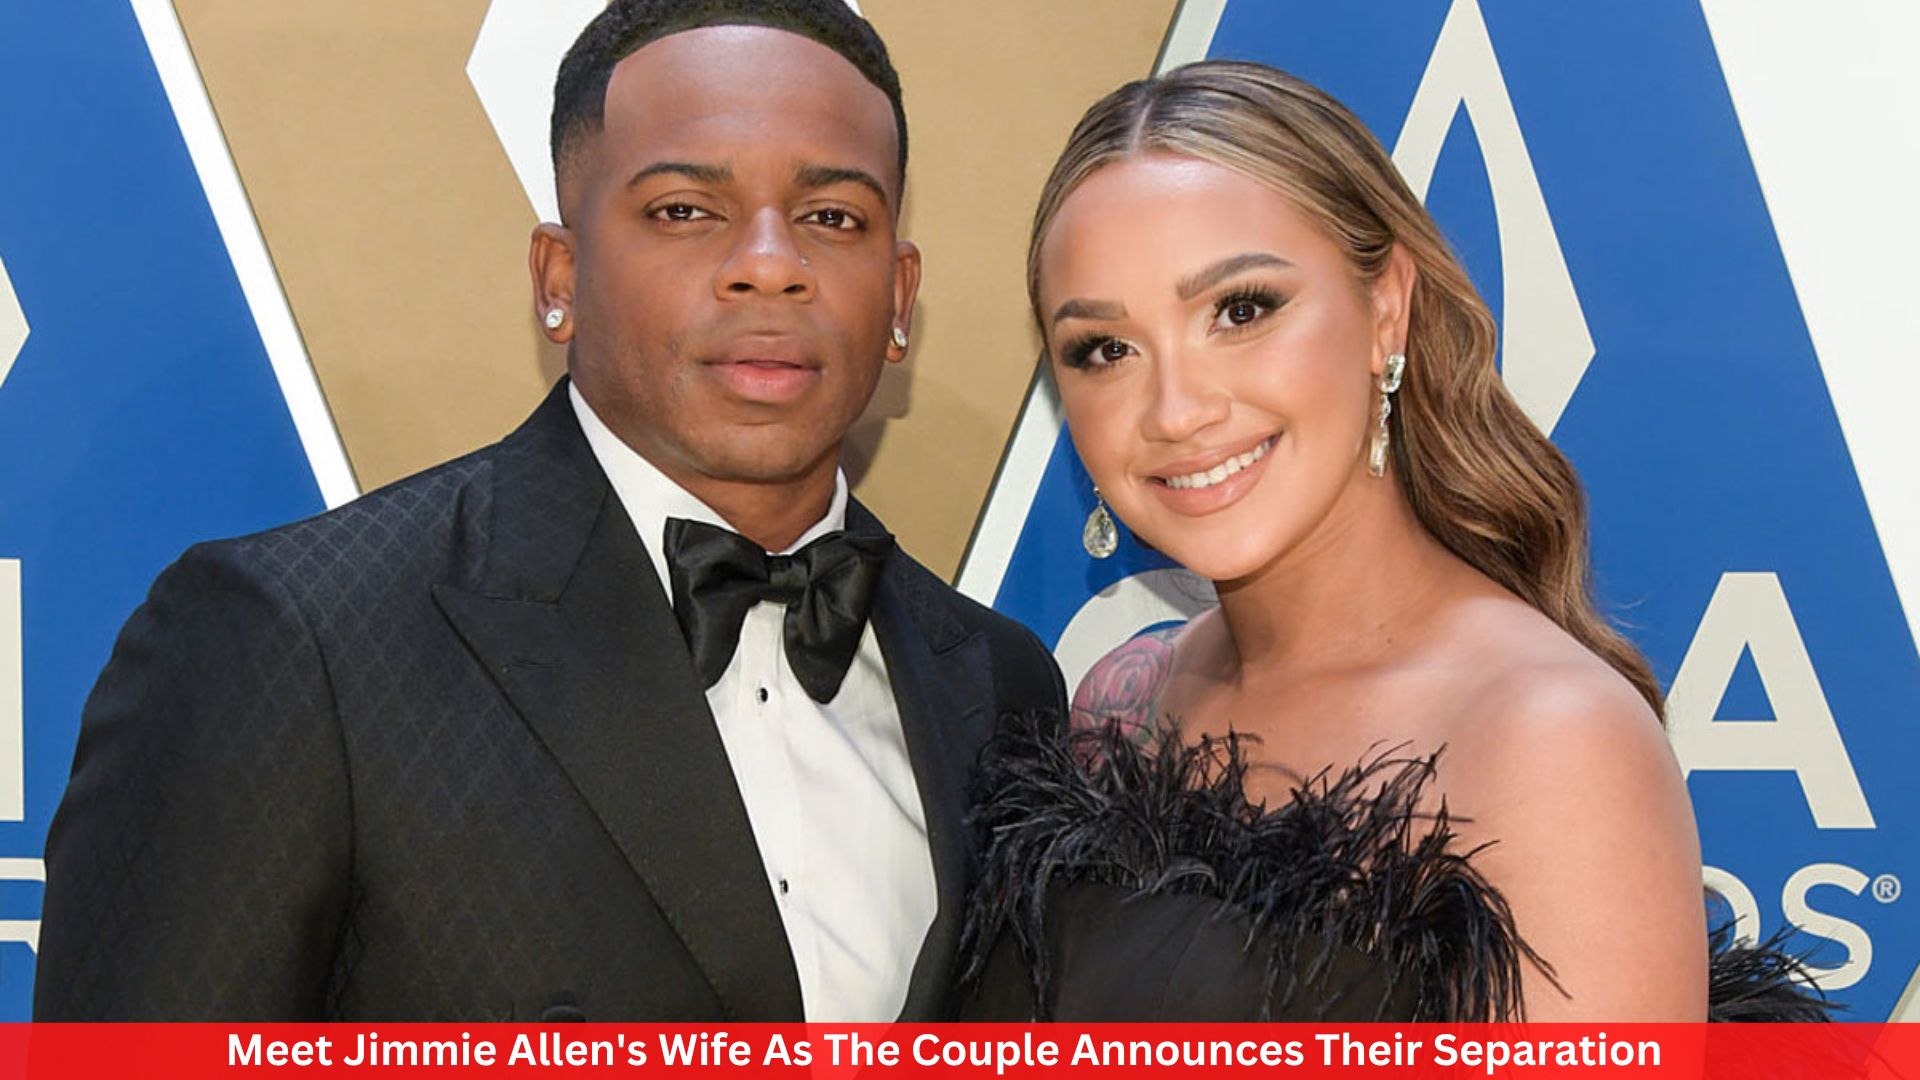 Meet Jimmie Allen's Wife As The Couple Announces Their Separation